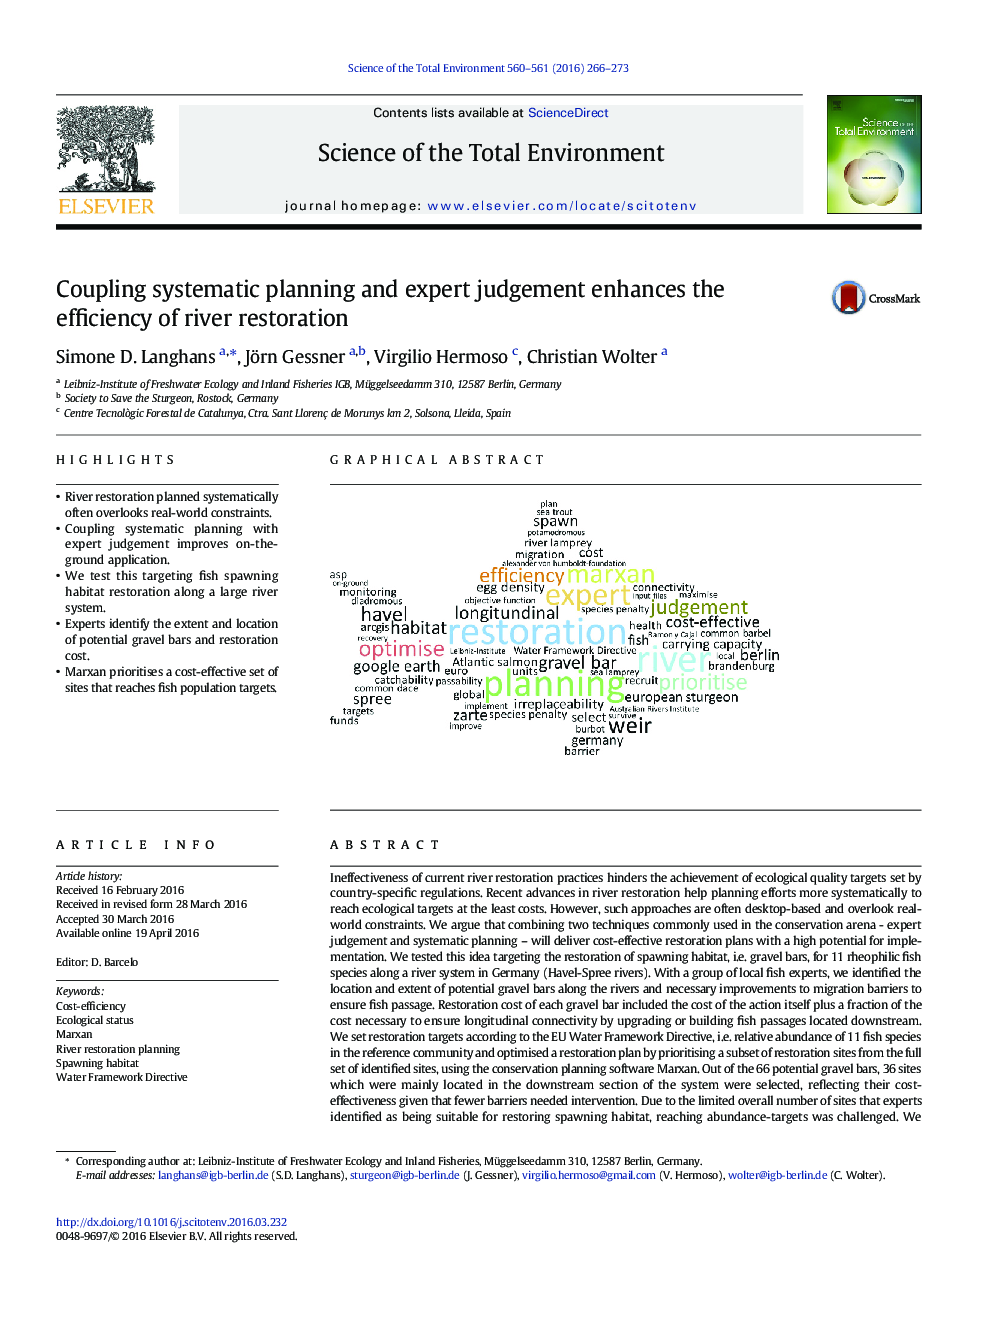 Coupling systematic planning and expert judgement enhances the efficiency of river restoration